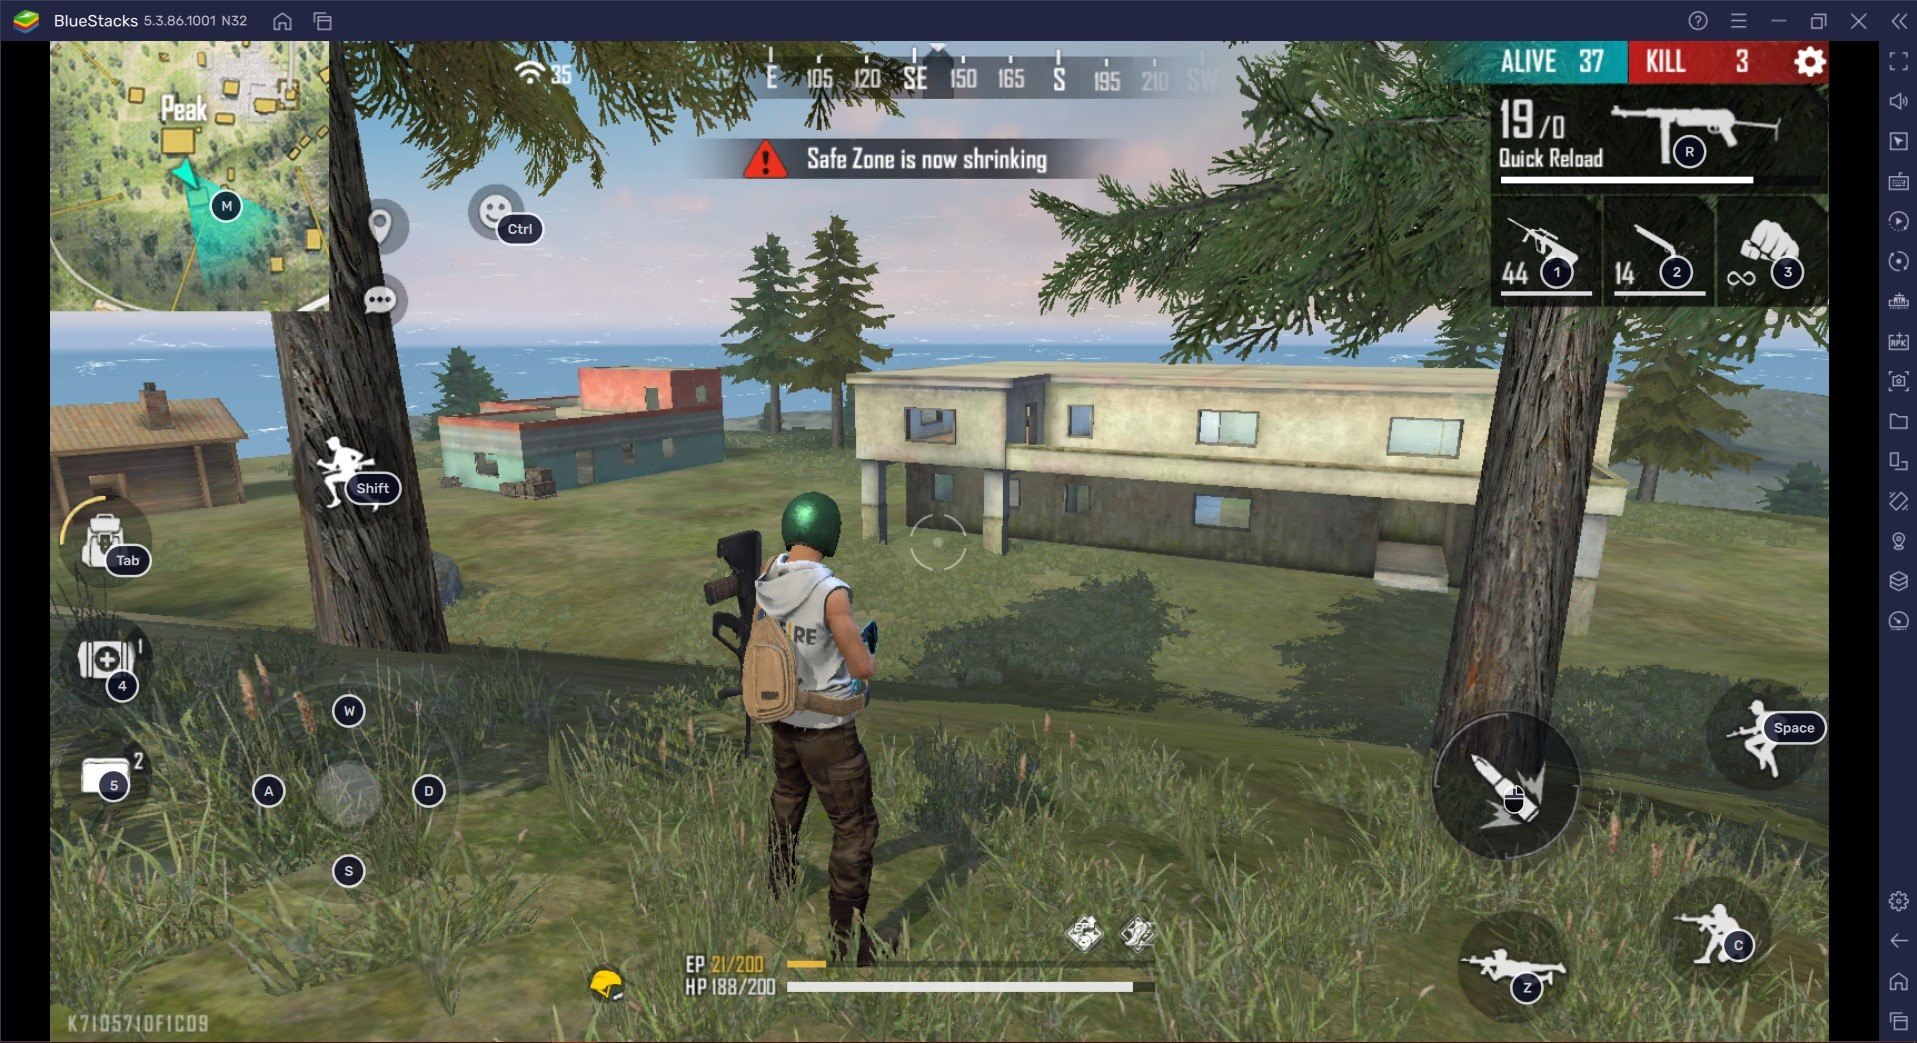 Free Fire Guide for Defeating Campers: Scout Your Surroundings